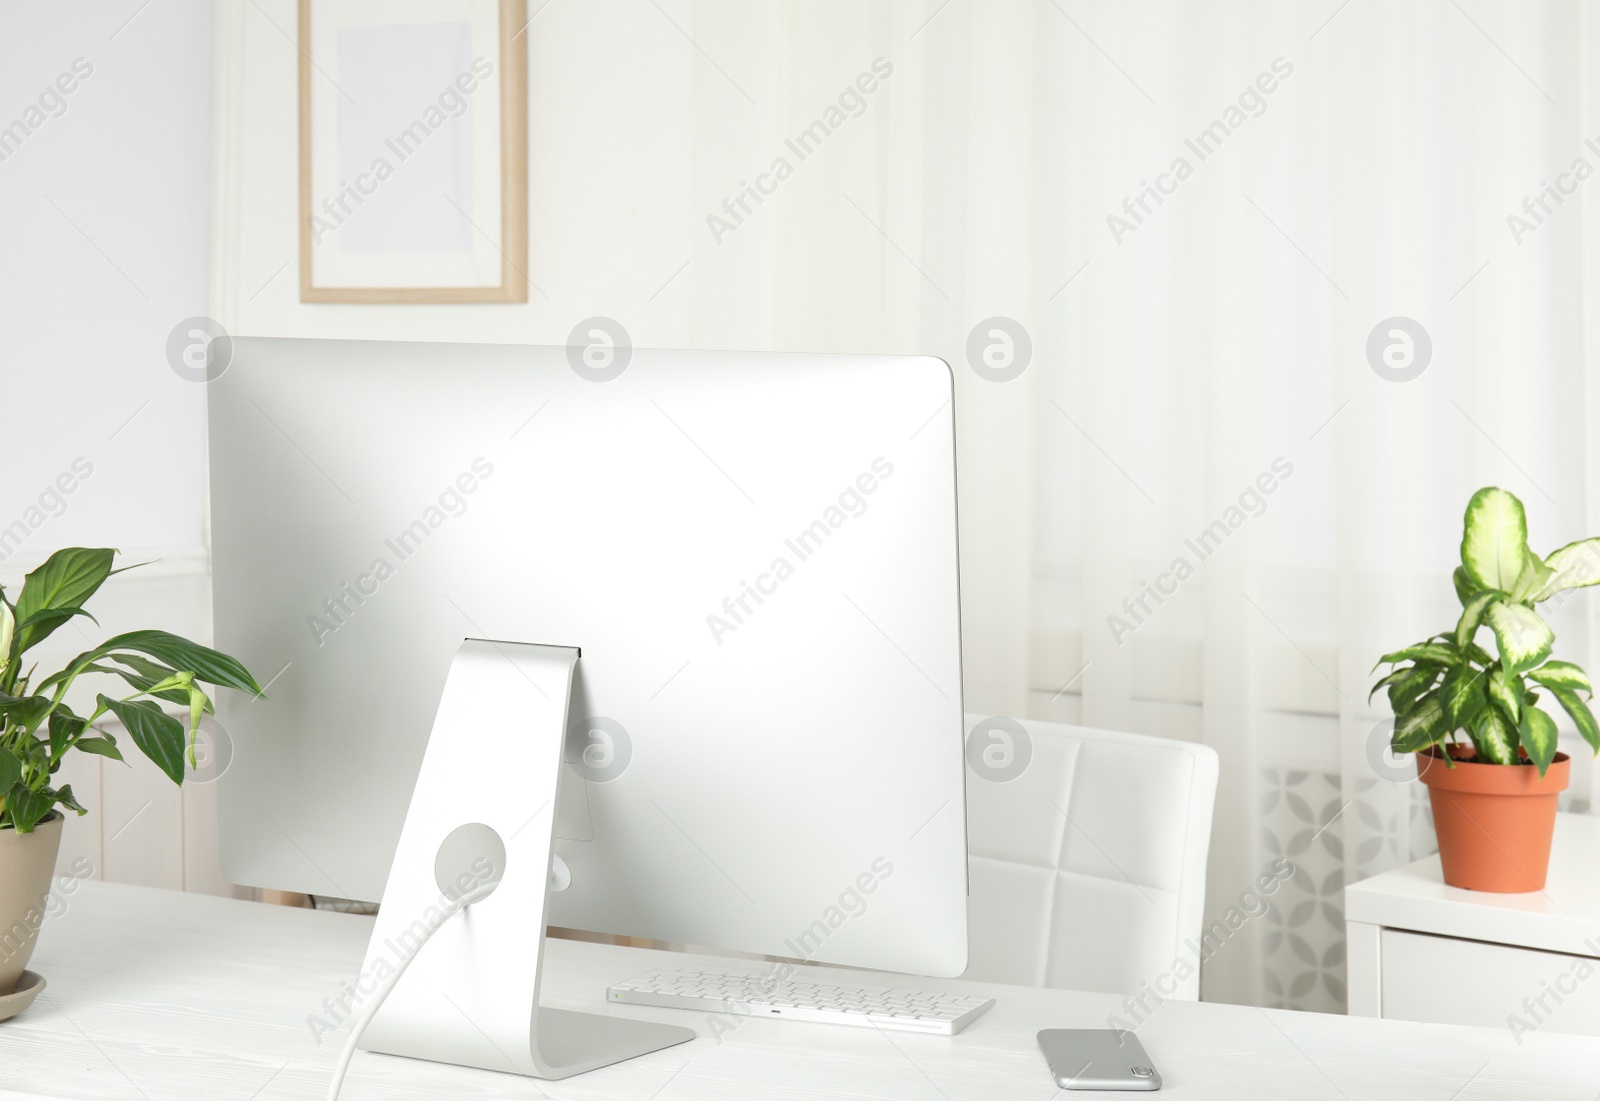 Photo of Office interior with houseplants and computer monitor on table